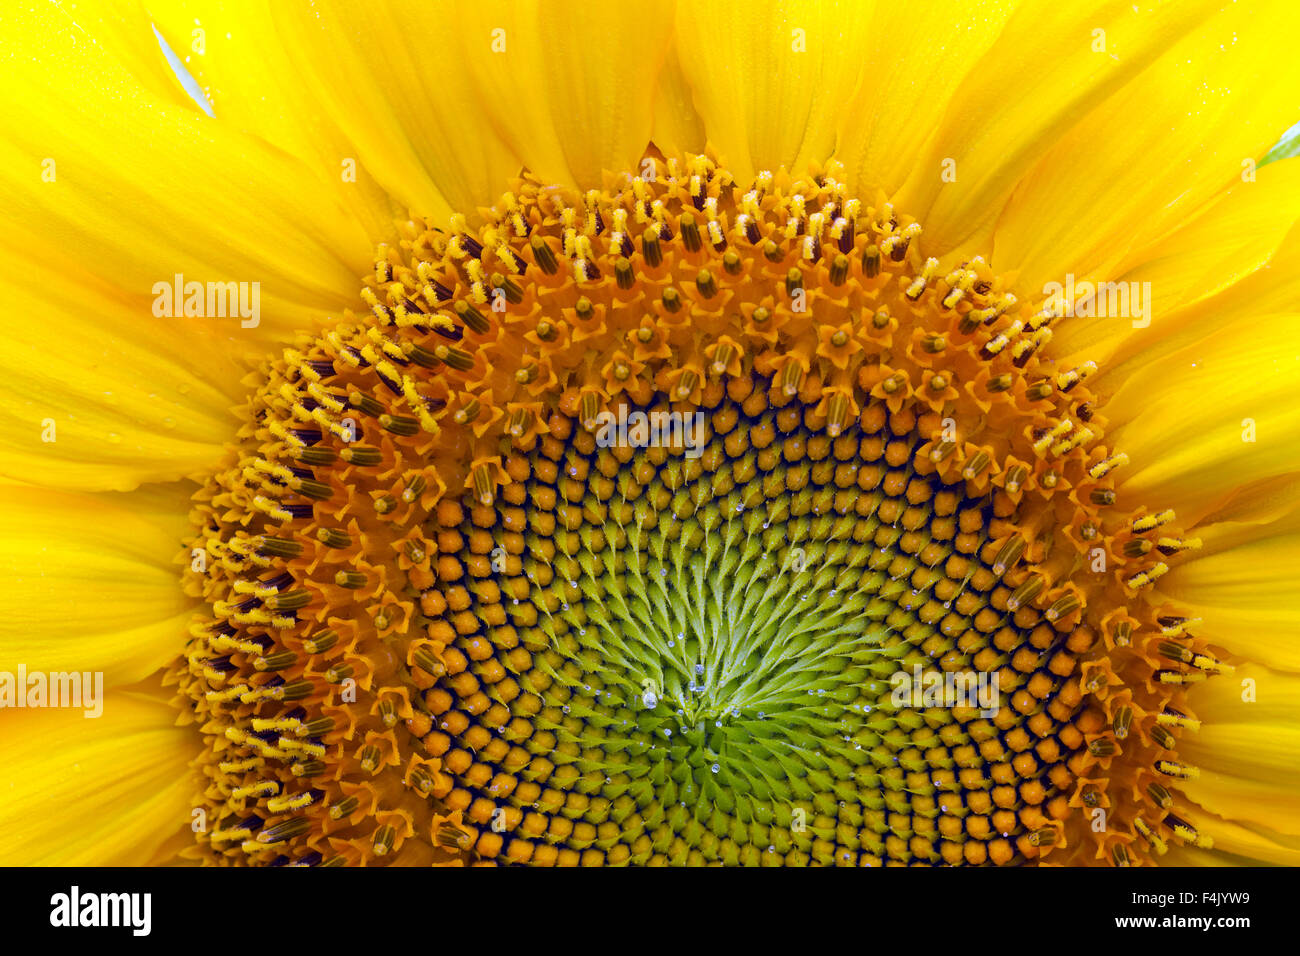 Common sunflower (Helianthus annuus) close up showing flower head displaying florets Stock Photo